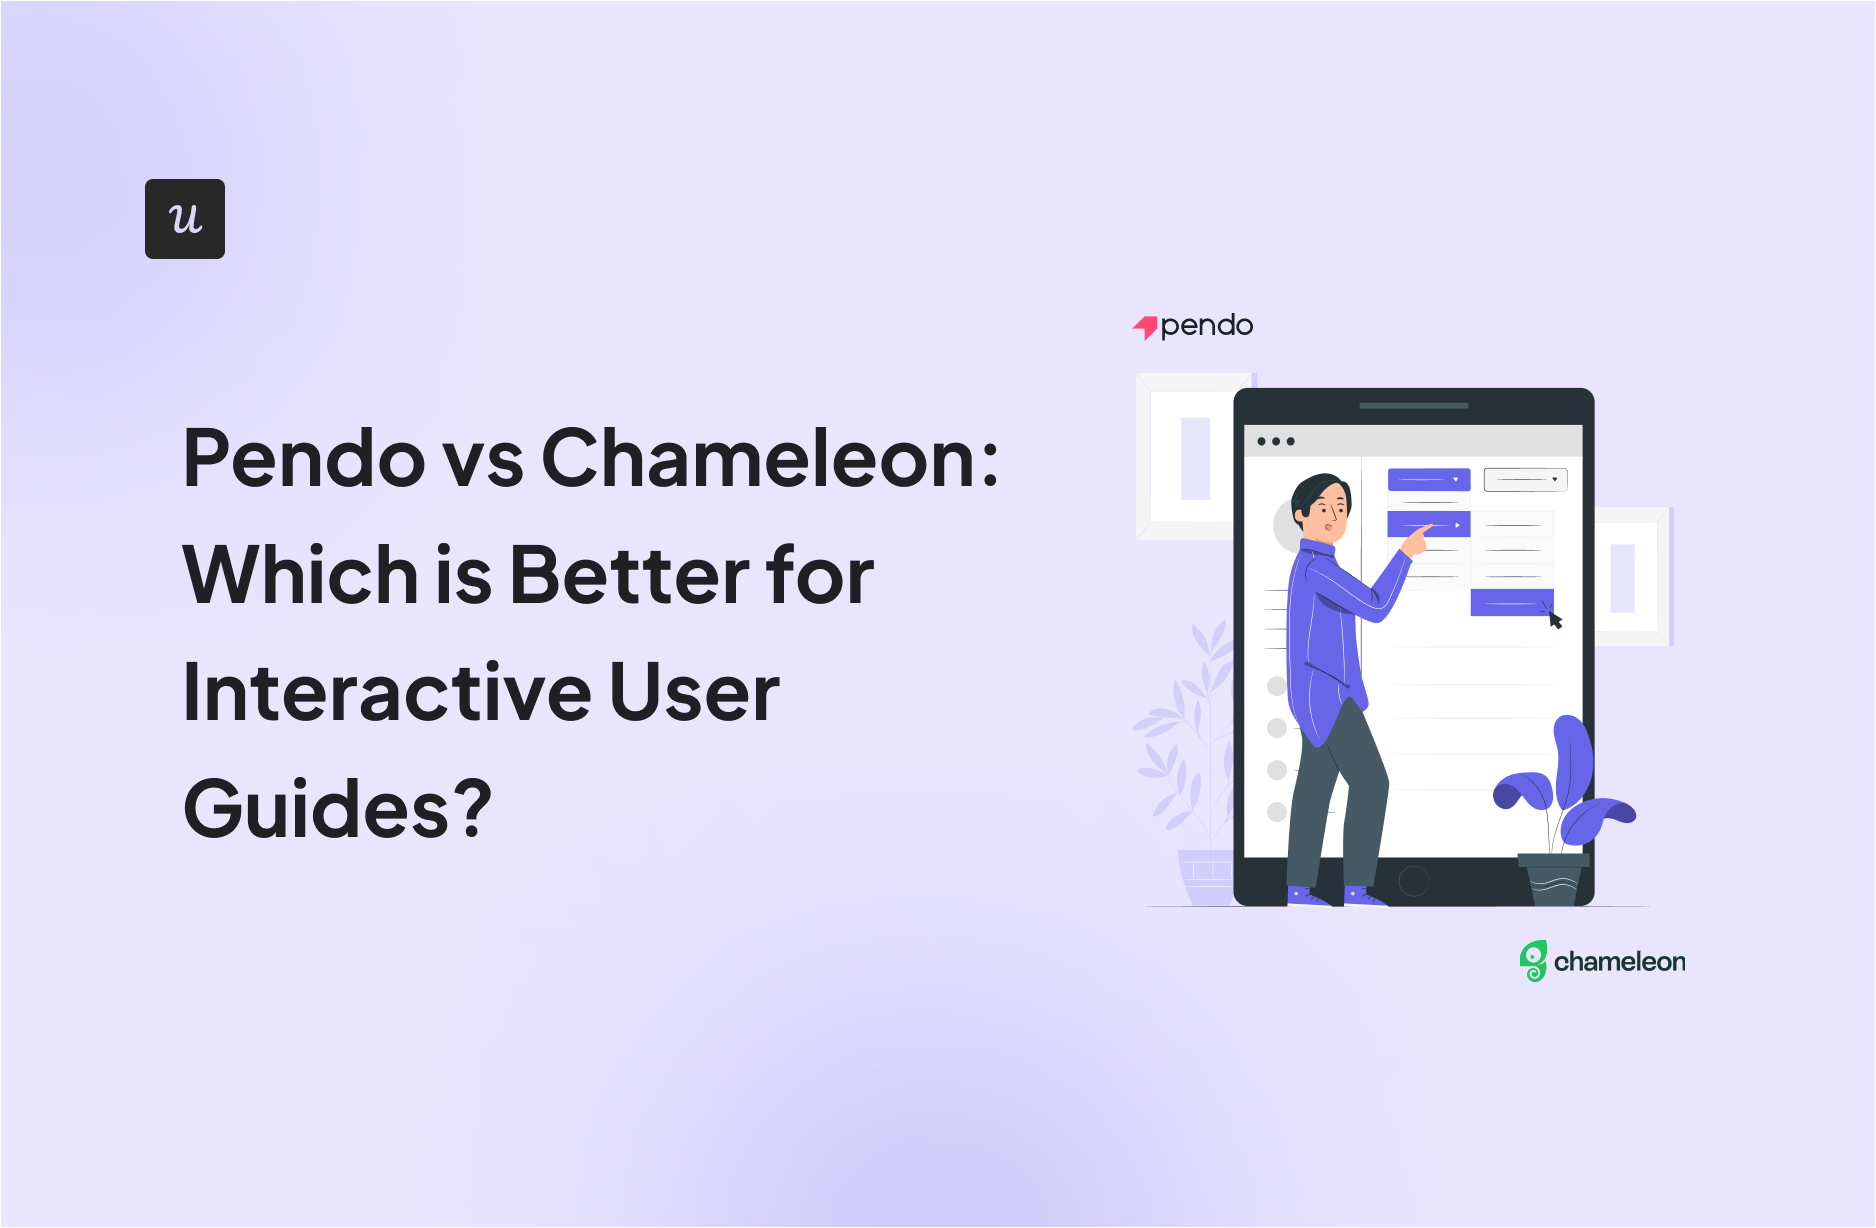 Pendo vs Chameleon: Which is Better for Interactive User Guides?